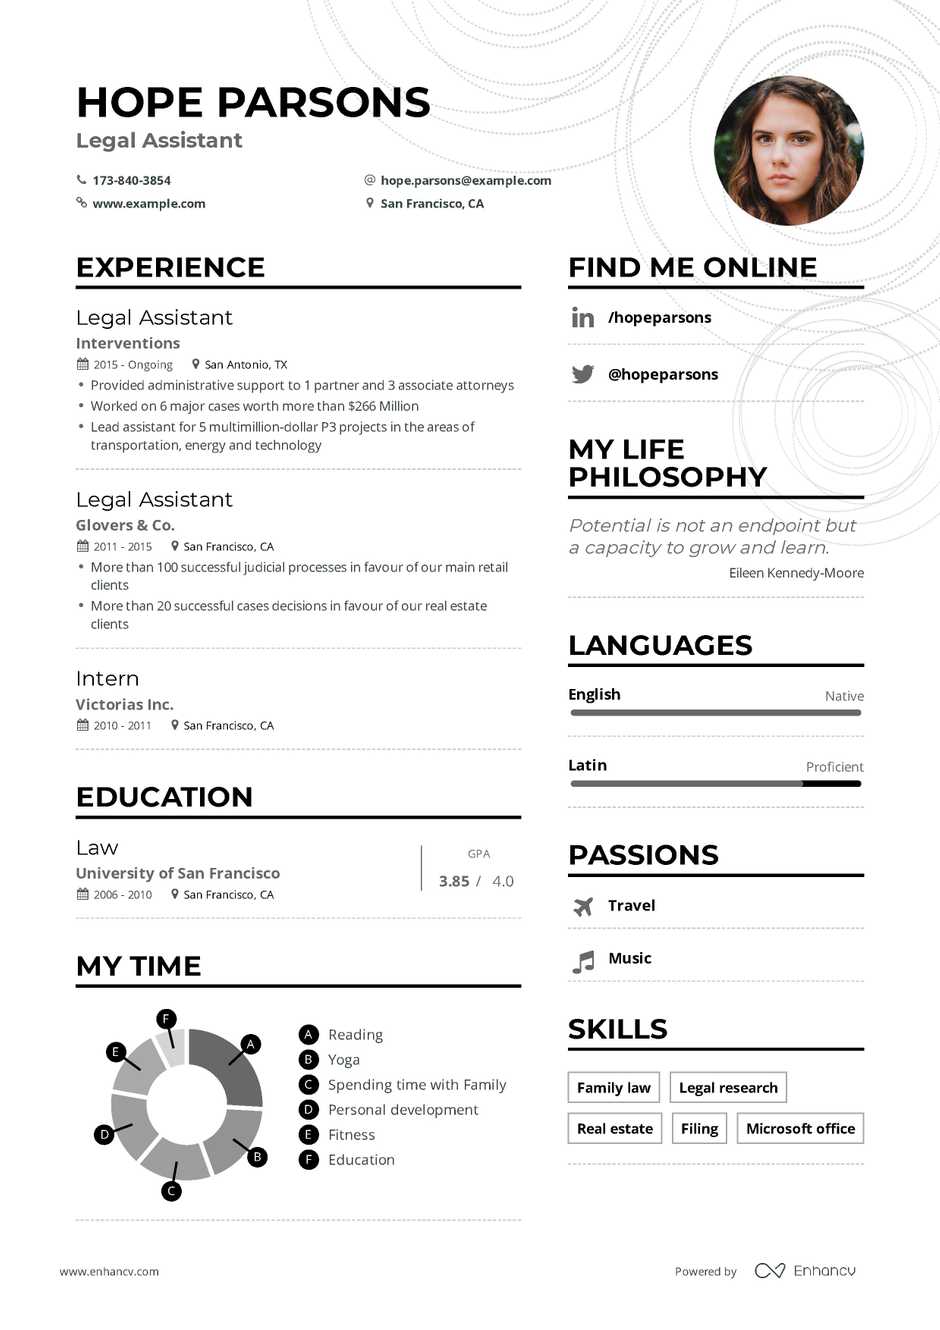 Legal Assistant Resume Example and guide for 2019